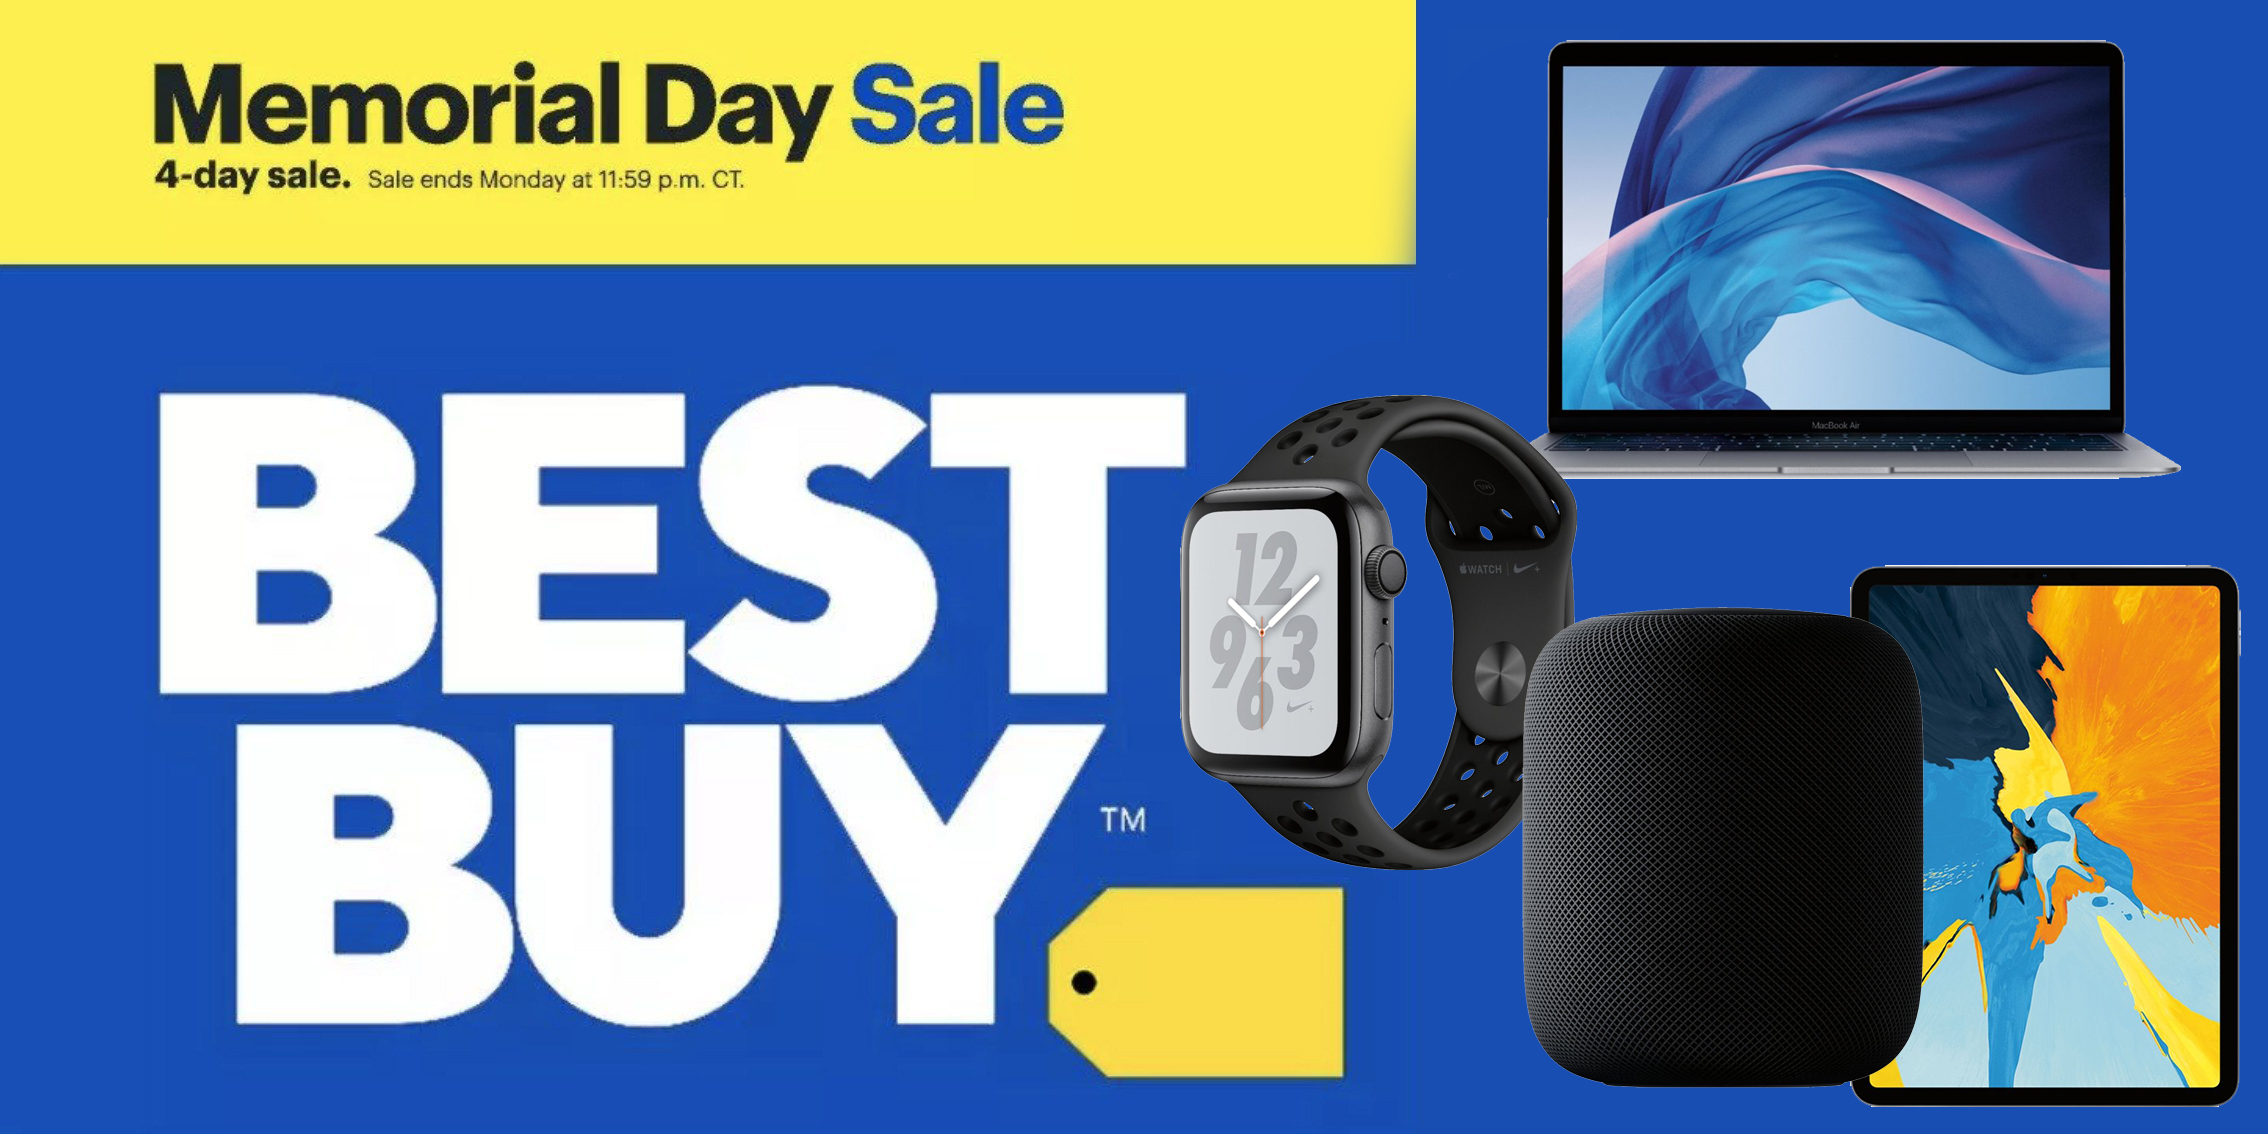 Best Buy Memorial Day Sale has deals on nearly every Apple product MacBooks, iPads, Apple Watch